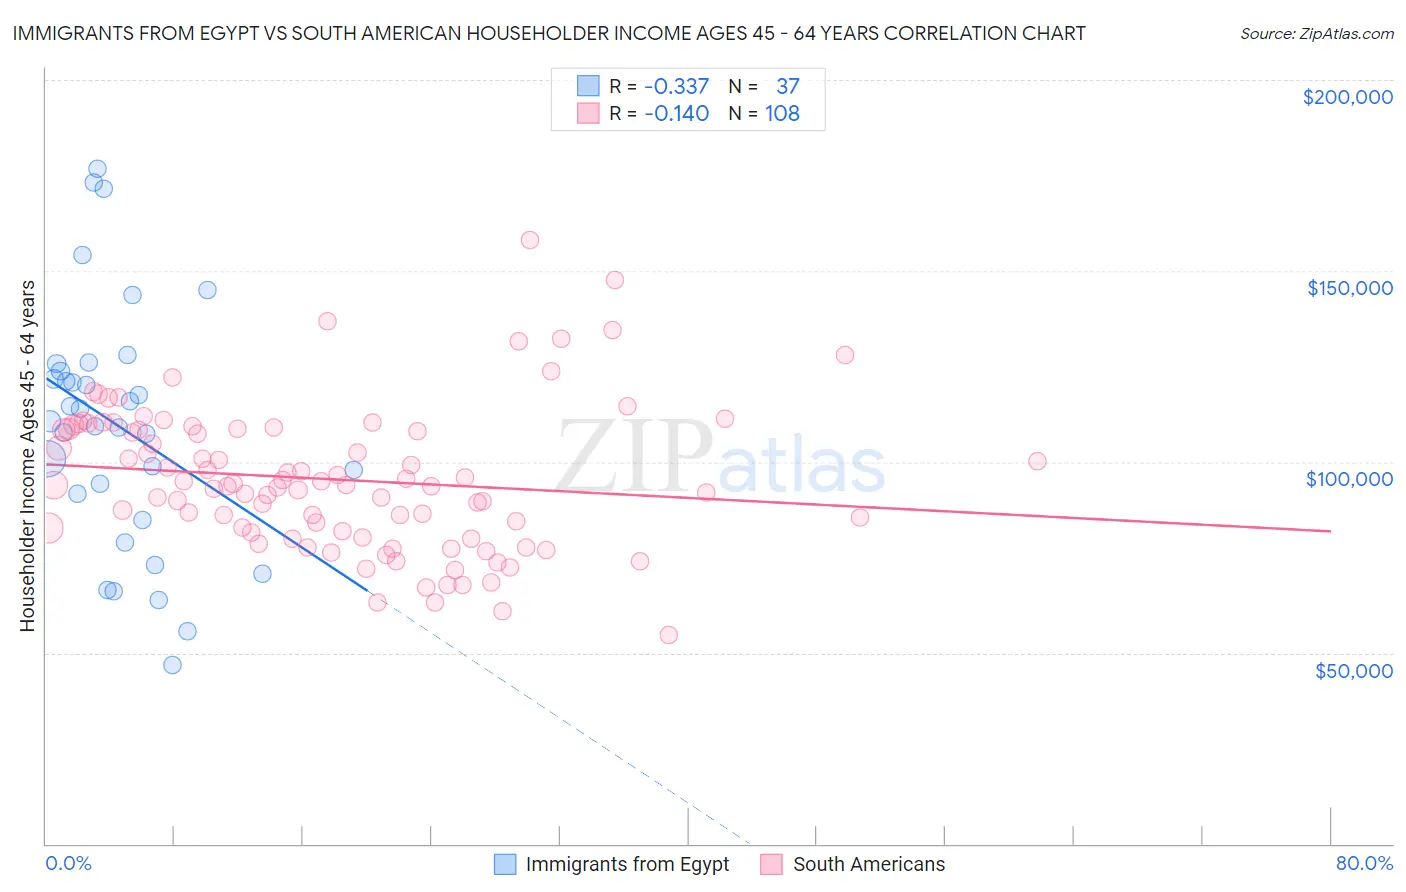 Immigrants from Egypt vs South American Householder Income Ages 45 - 64 years